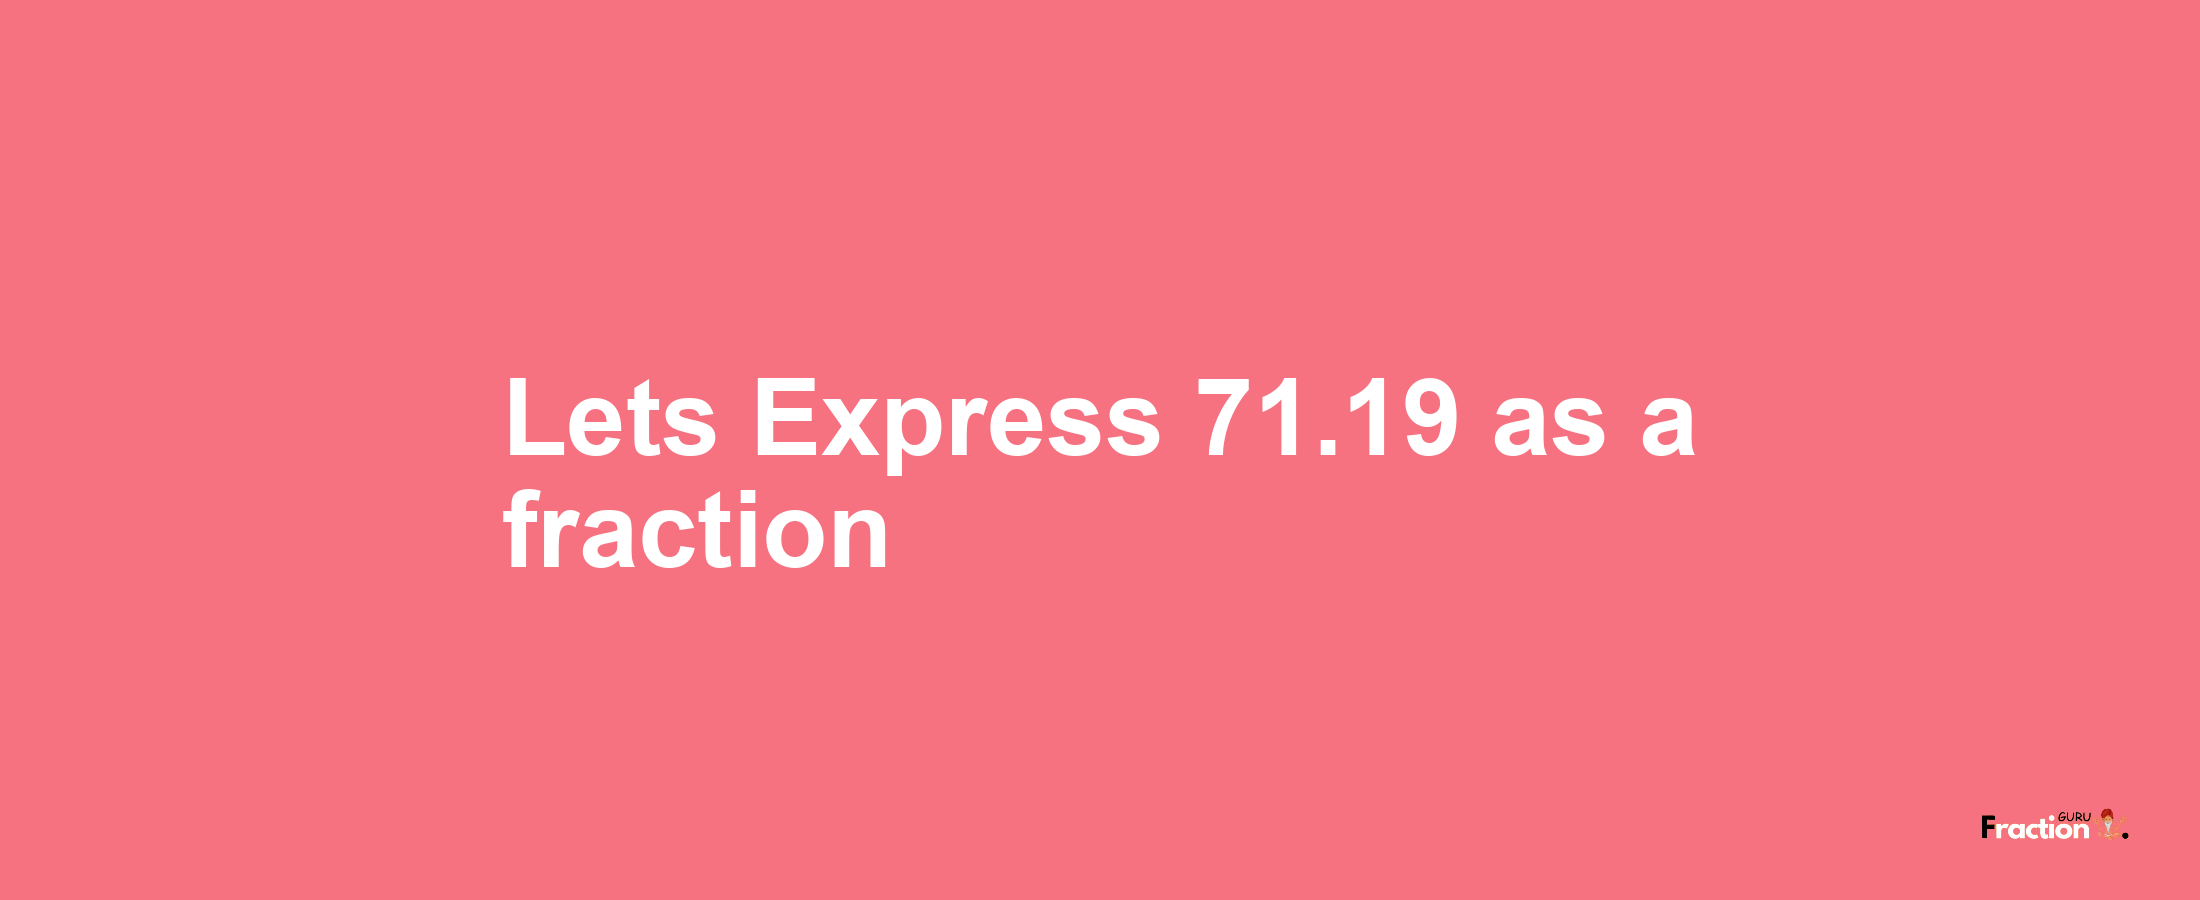 Lets Express 71.19 as afraction